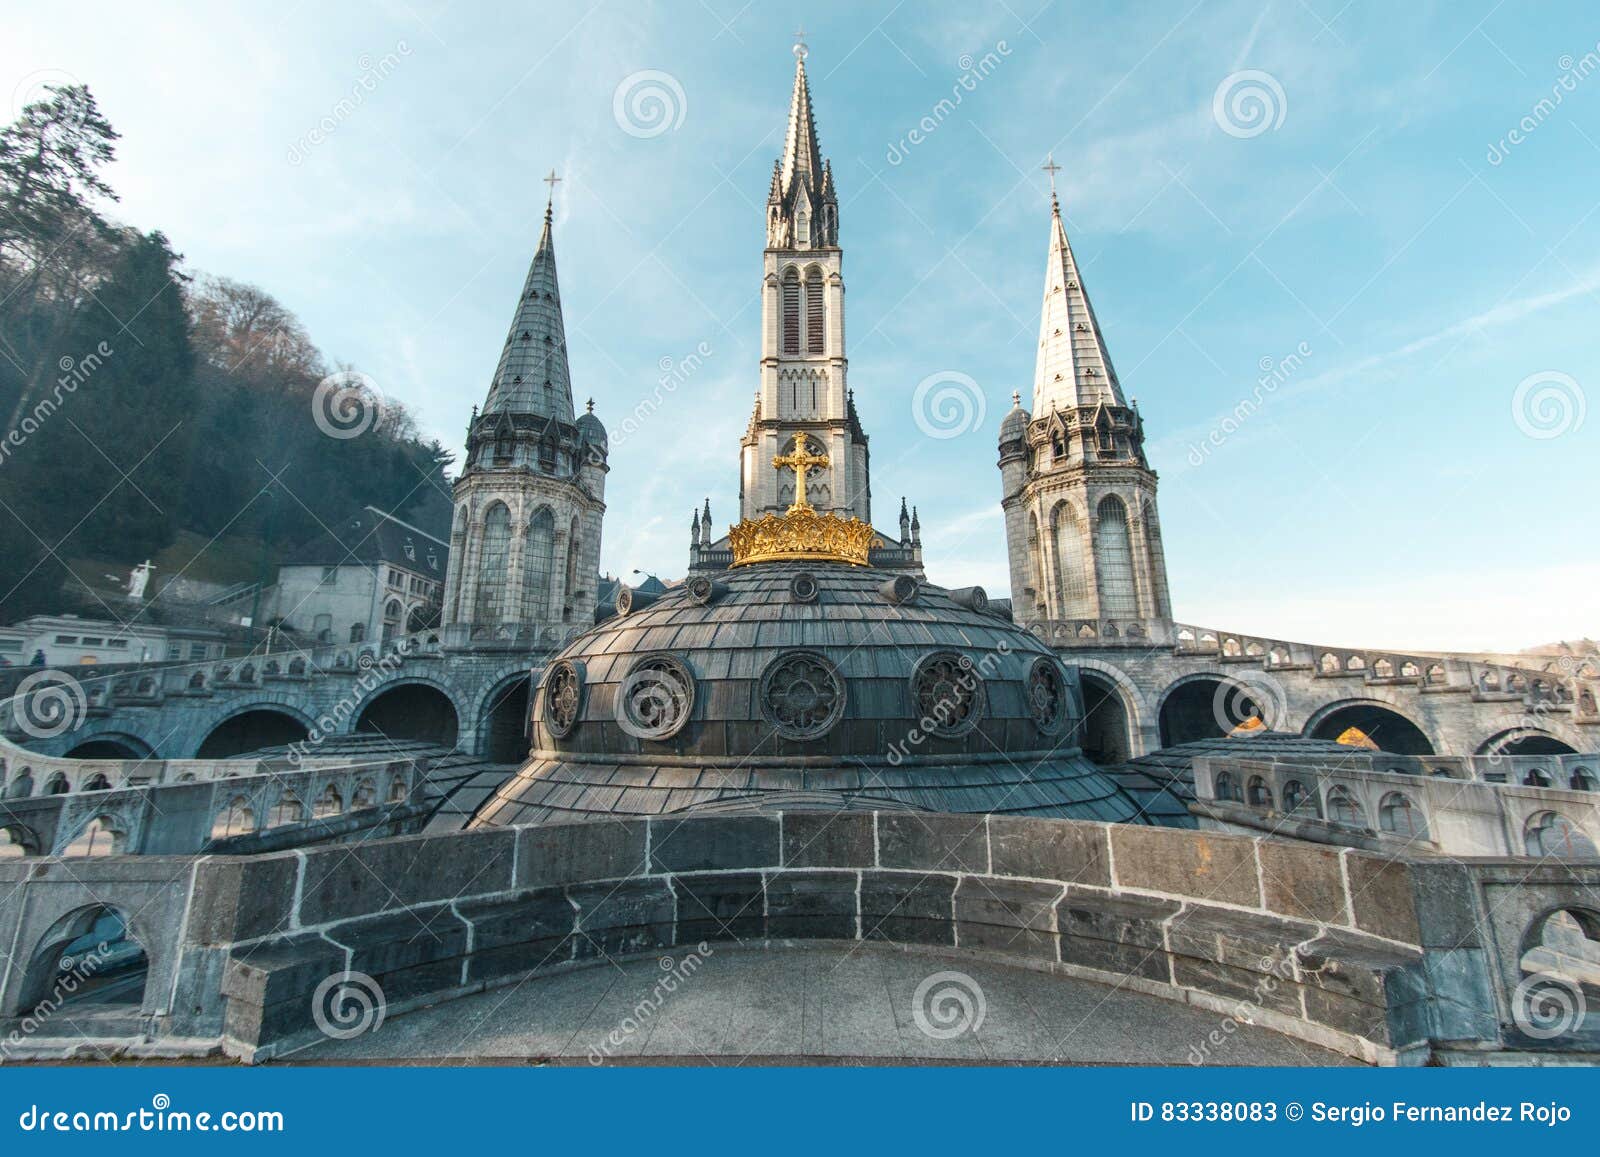 Sanctuary of Our Lady of Lourdes. Stock Image - Image of pyrenees ...